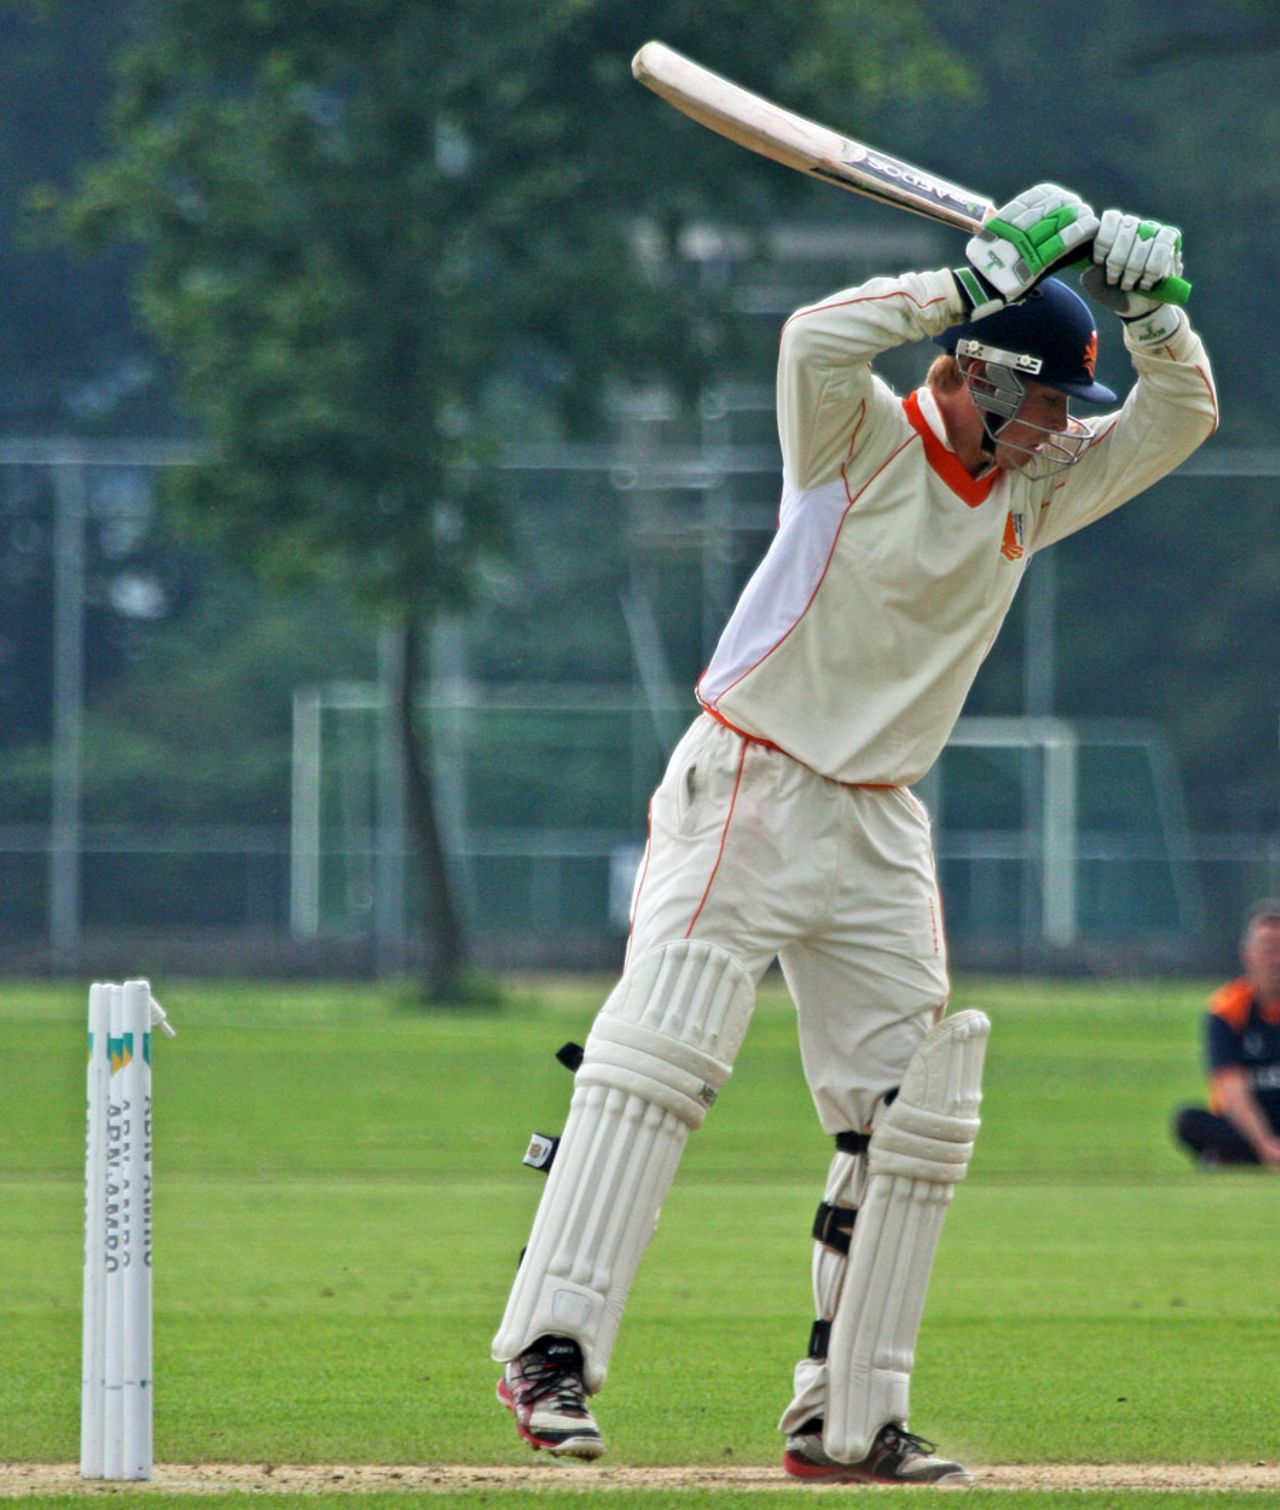 James Gruijters was bowled by Max Sorensen for 5, Netherlands v Ireland, ICC Intercontinental Cup, 3rd day, Deventer, July 3, 2013